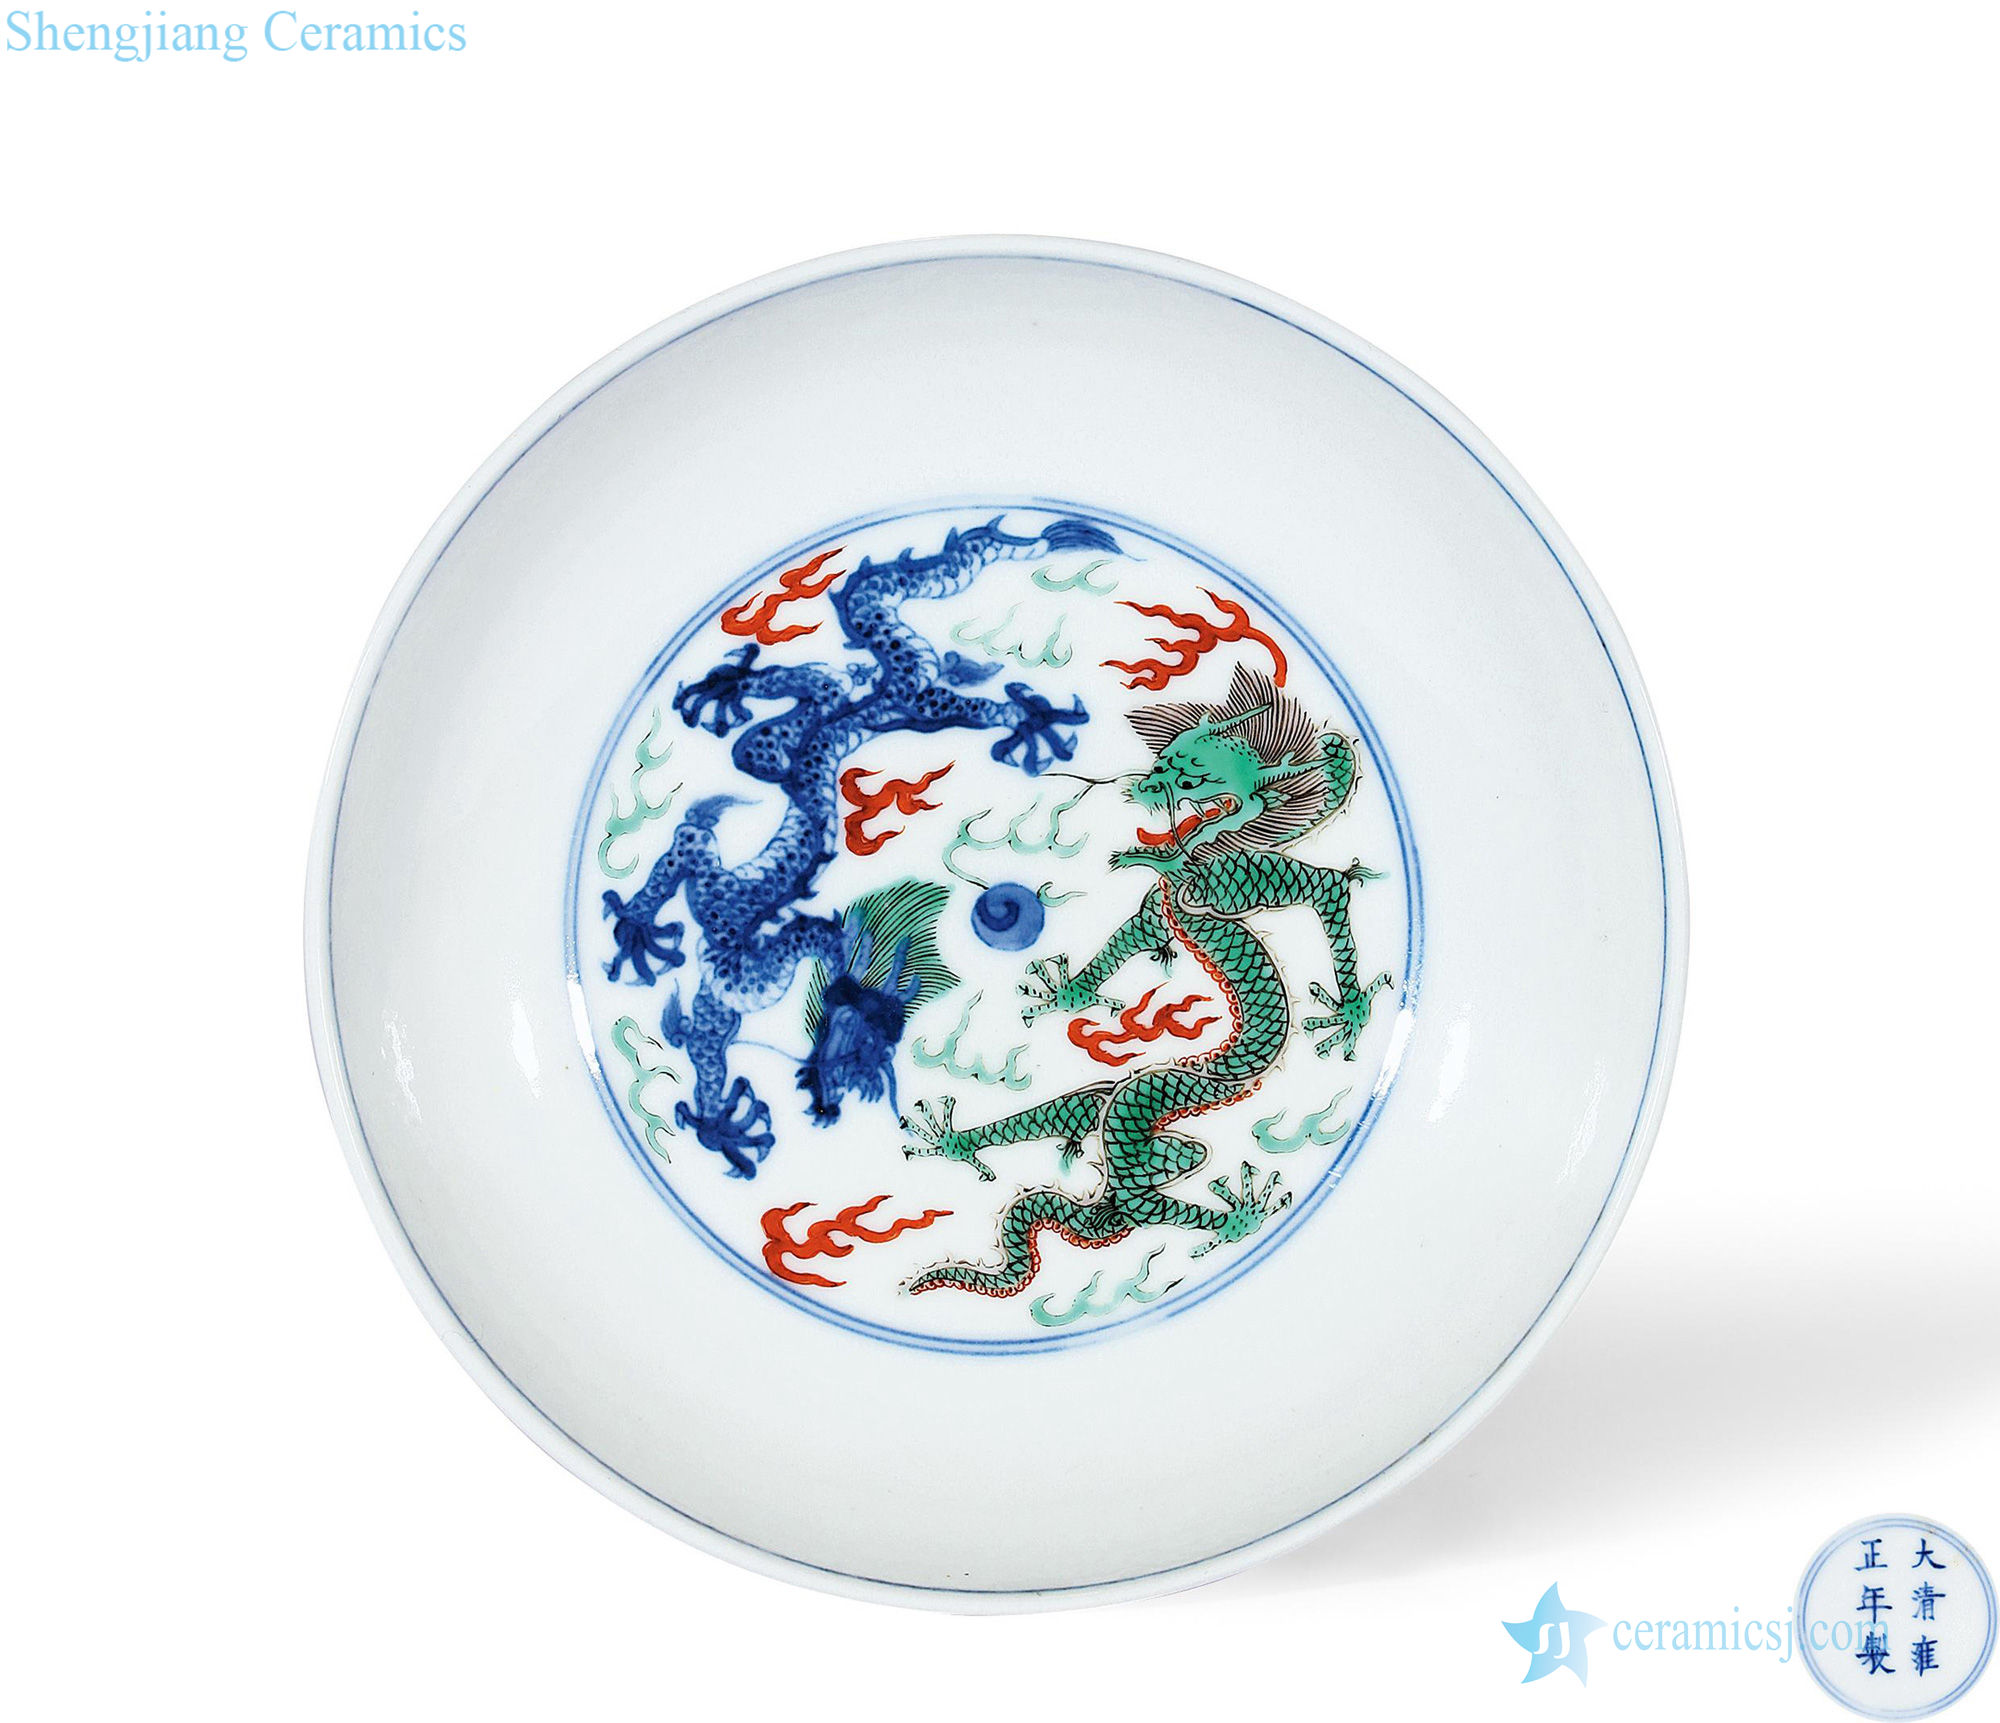 Qing yongzheng bucket color James t. c. na was published dragon playing pearl tray